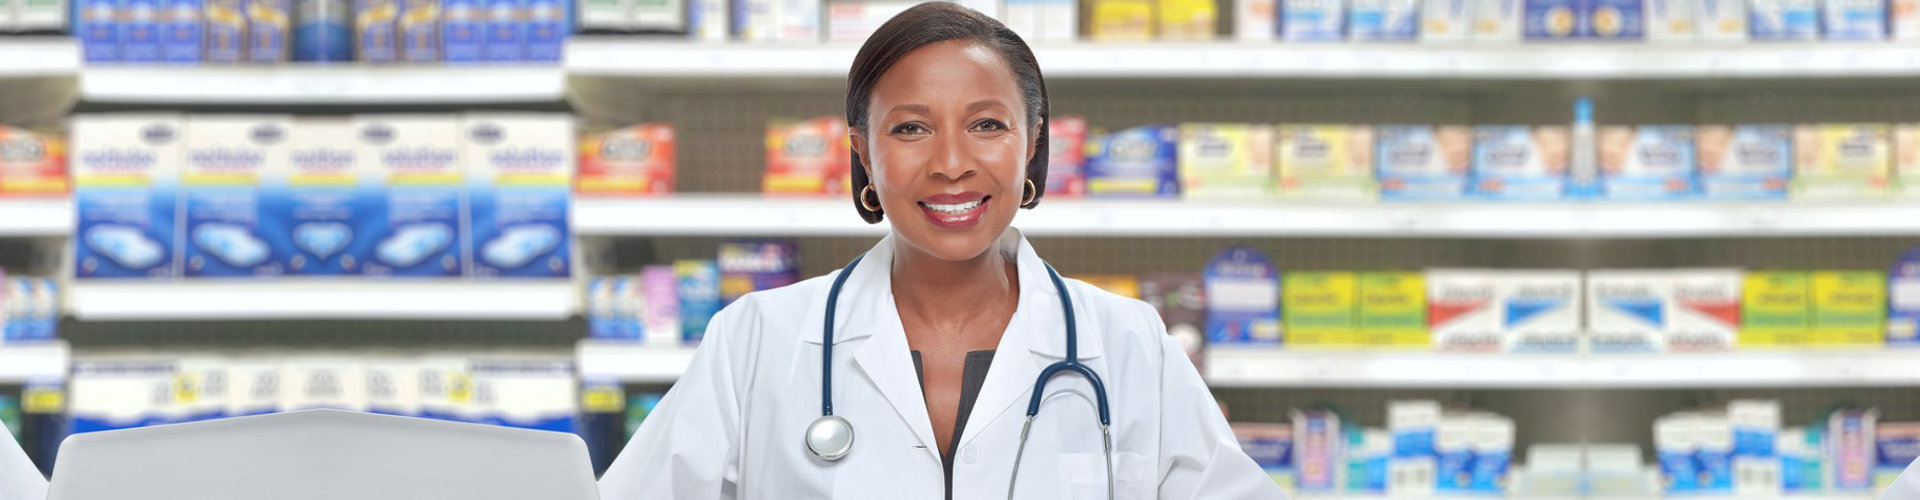 a pharmacist smiling at the camera